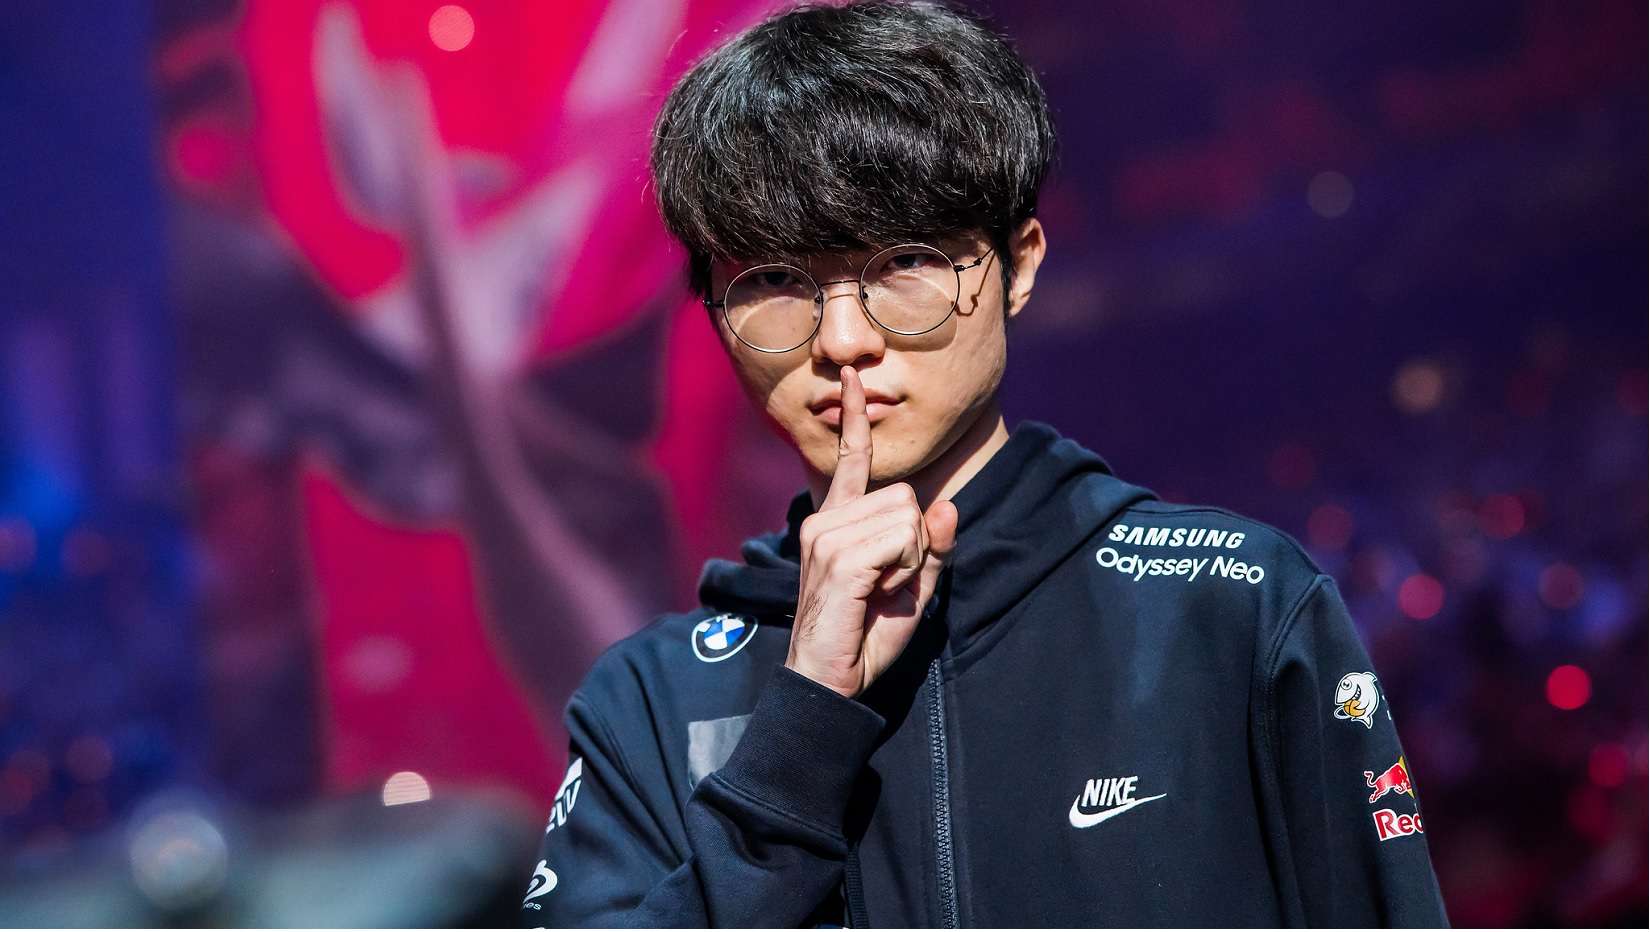 The Demon King is considered a player "versatile" at the top Korean League of Legends tournament.